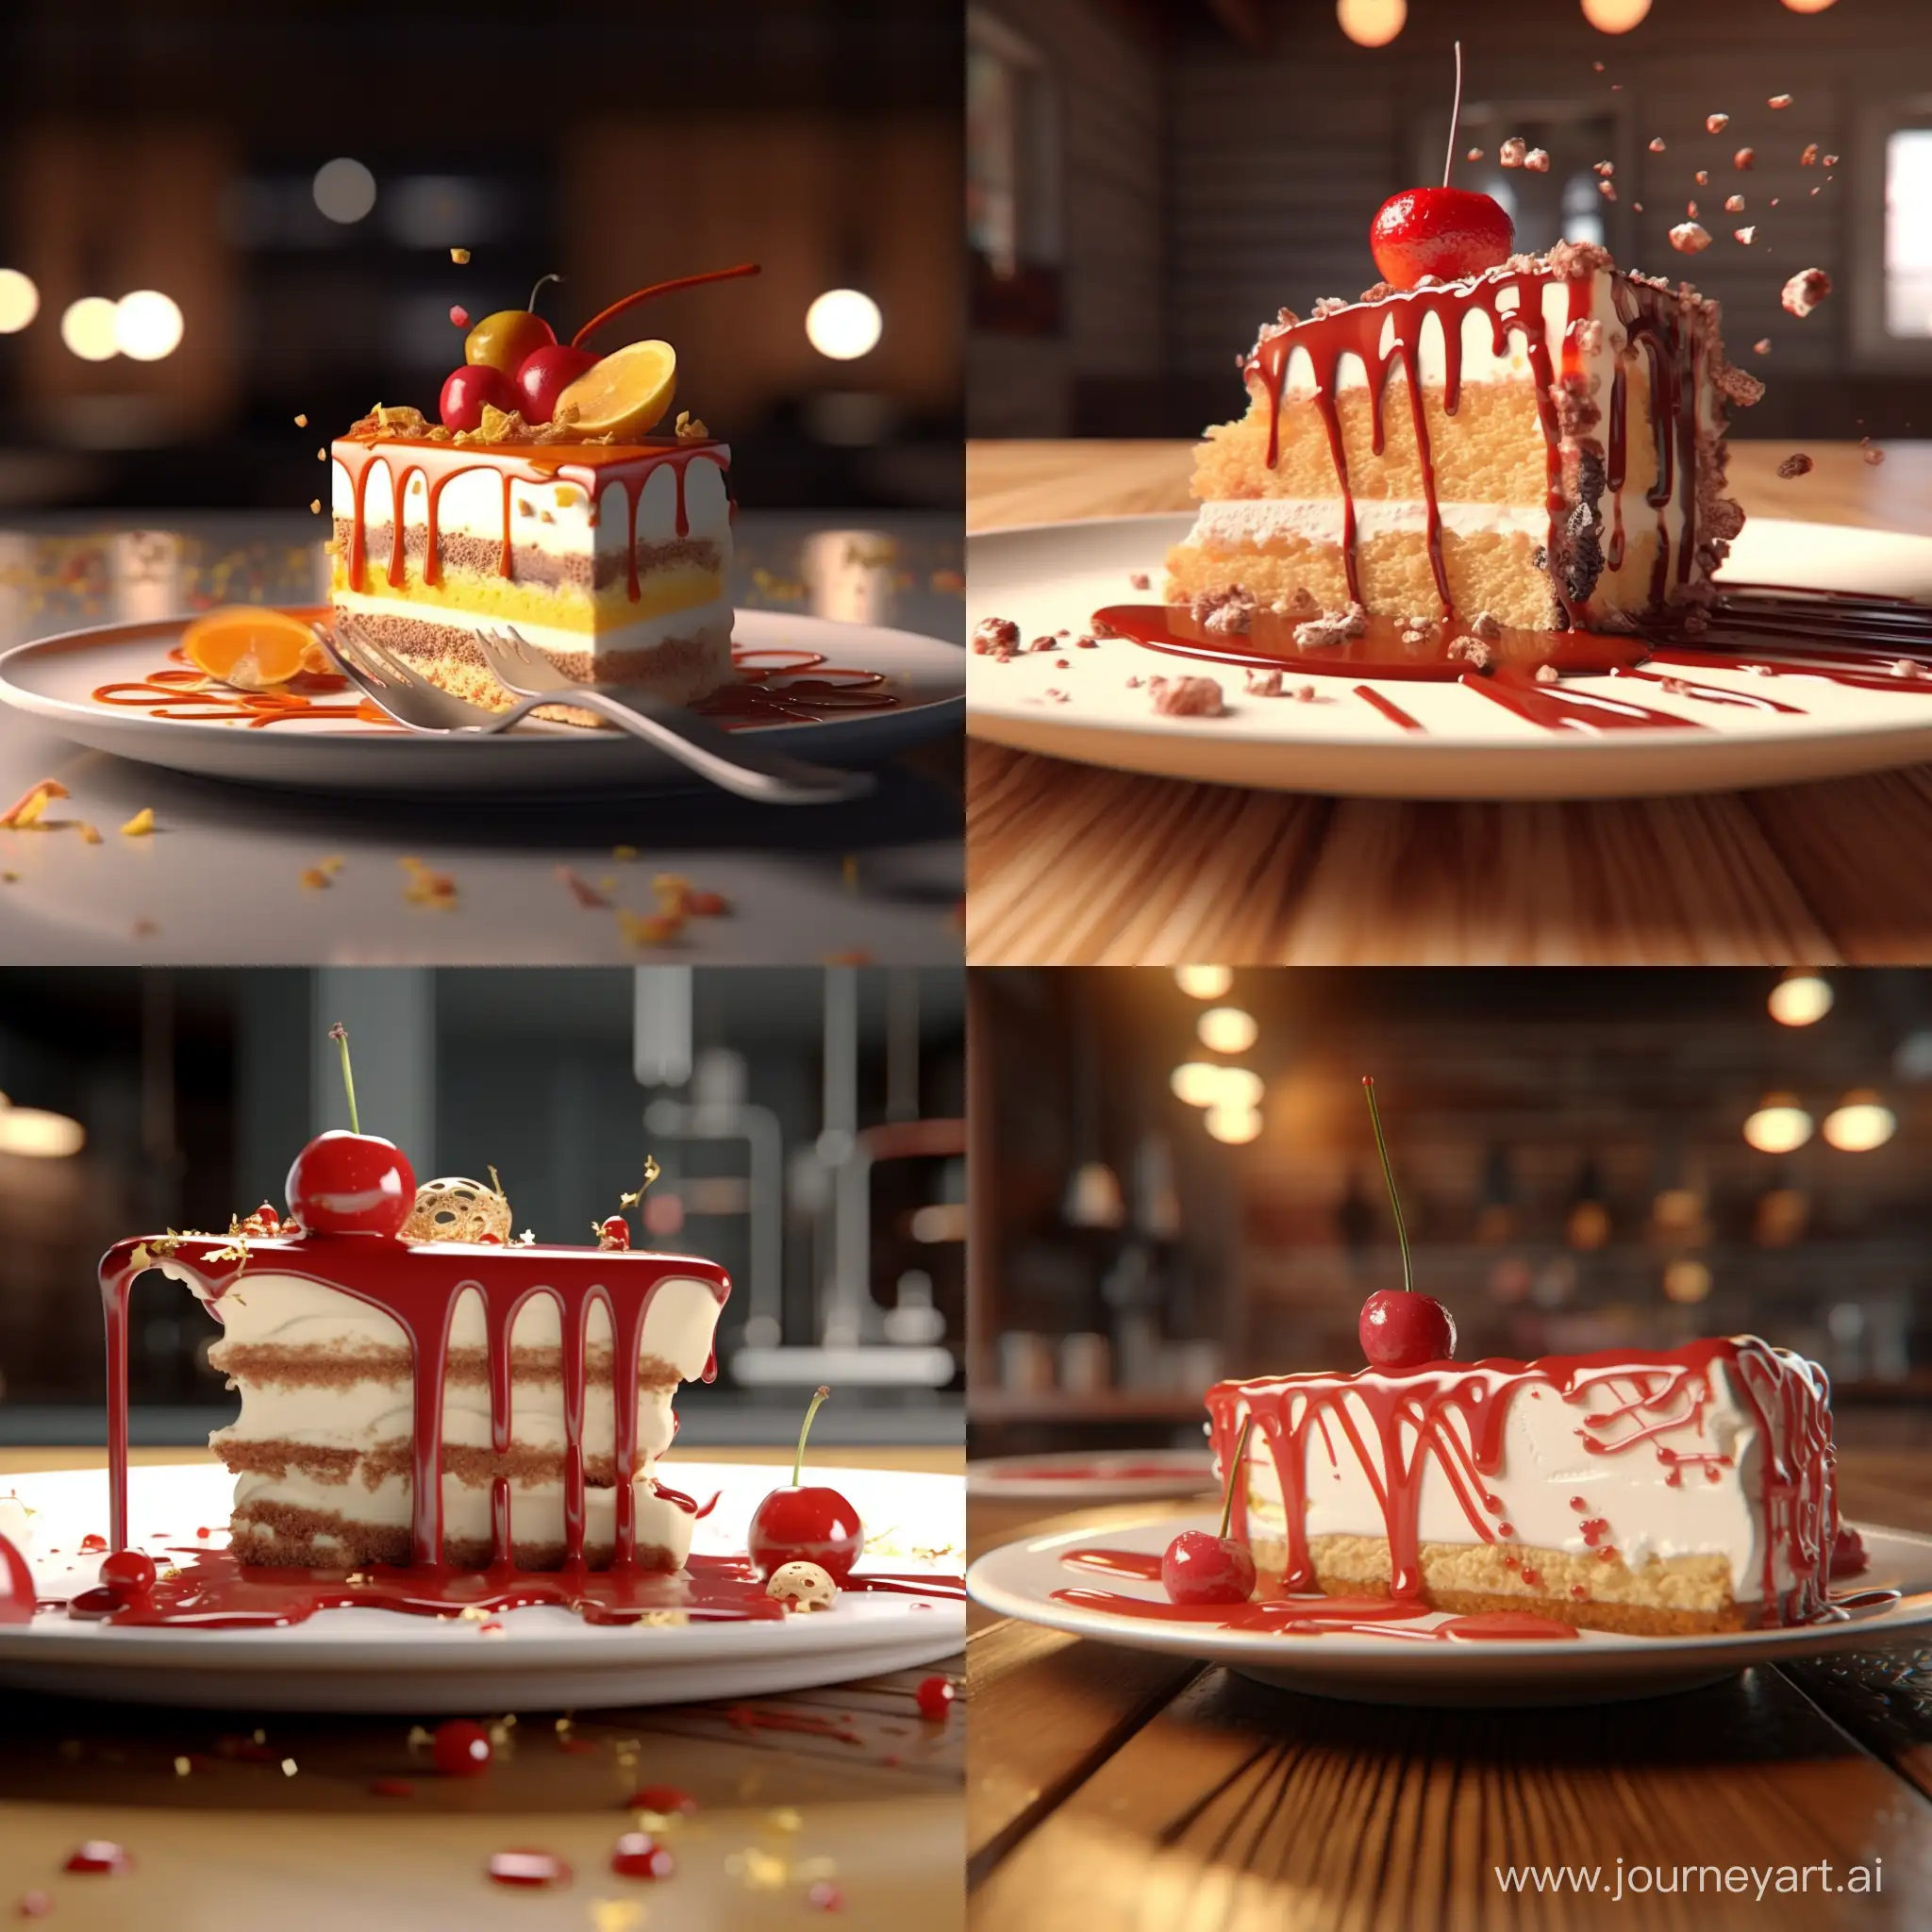 Delicious-3D-Animated-Cheesecake-Irresistible-Culinary-Artistry